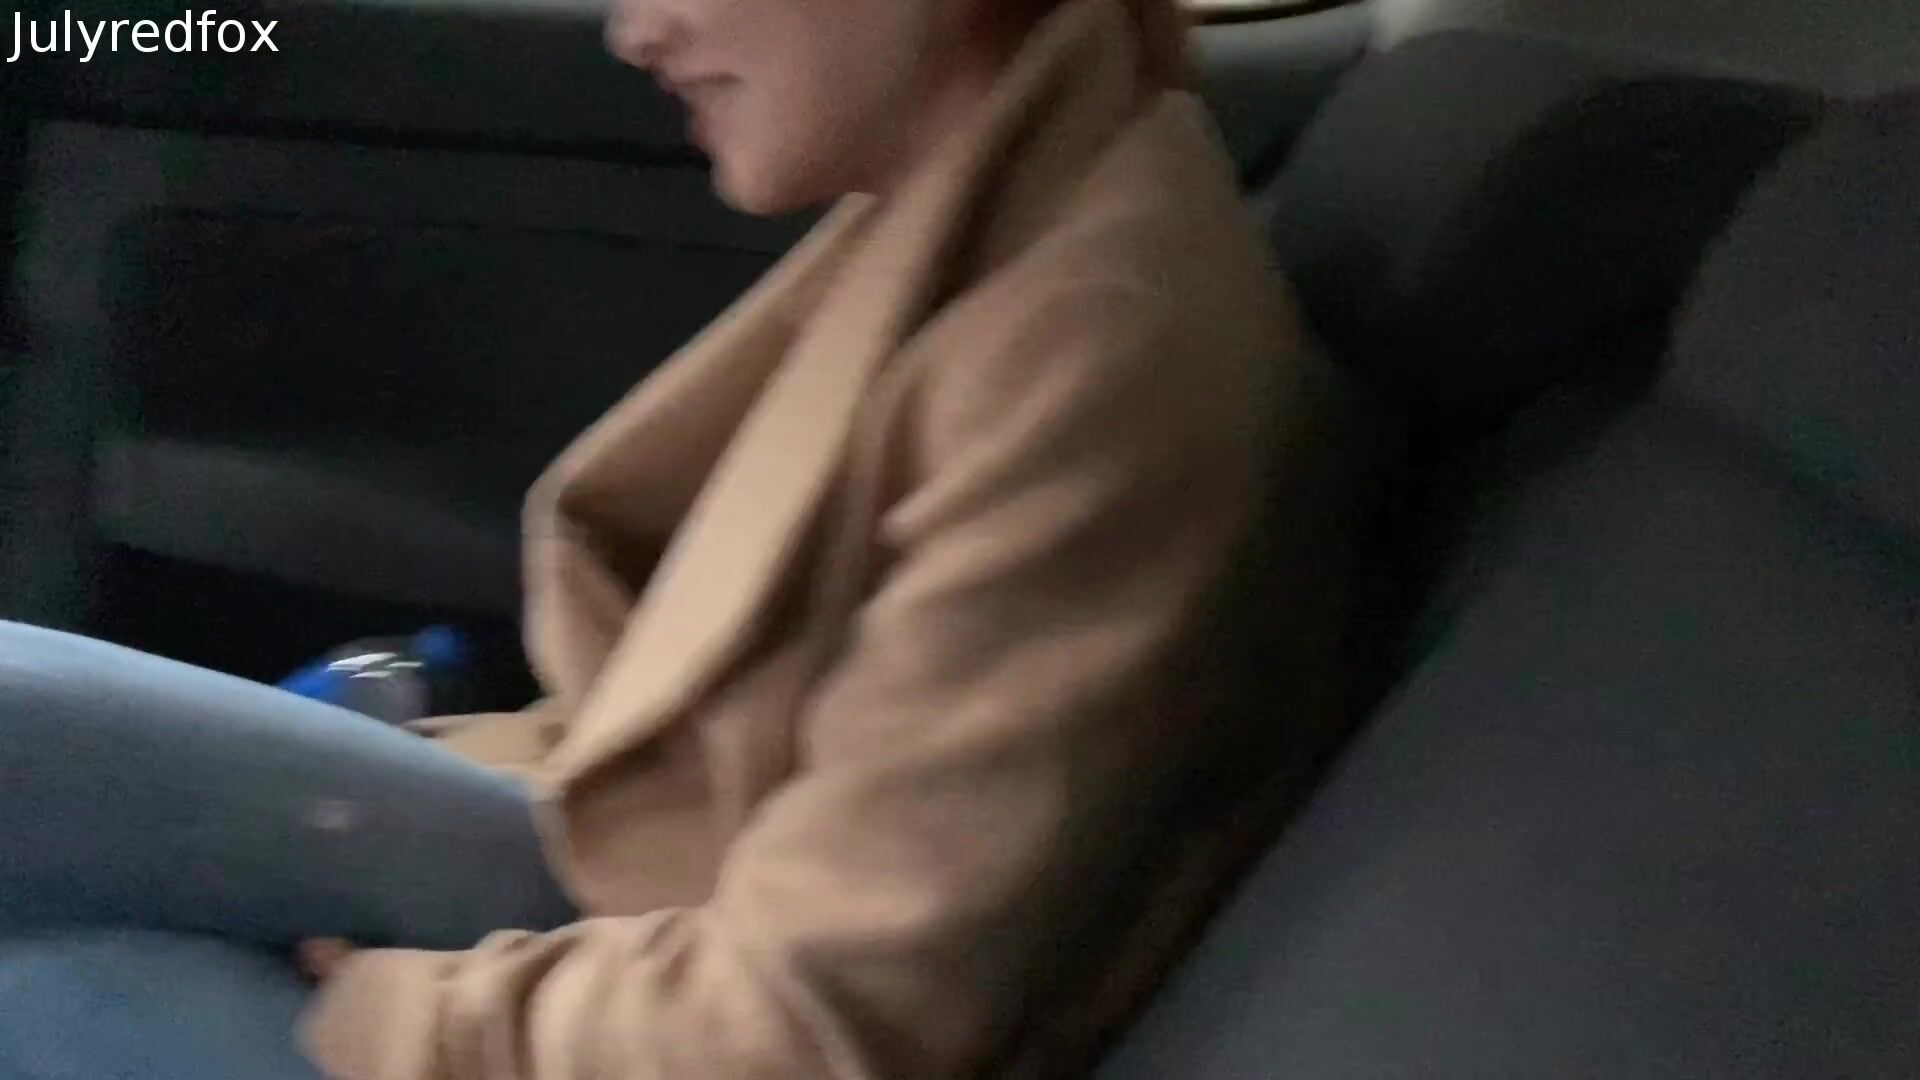 Redhead Girl Play With Vibrator In Taxi.